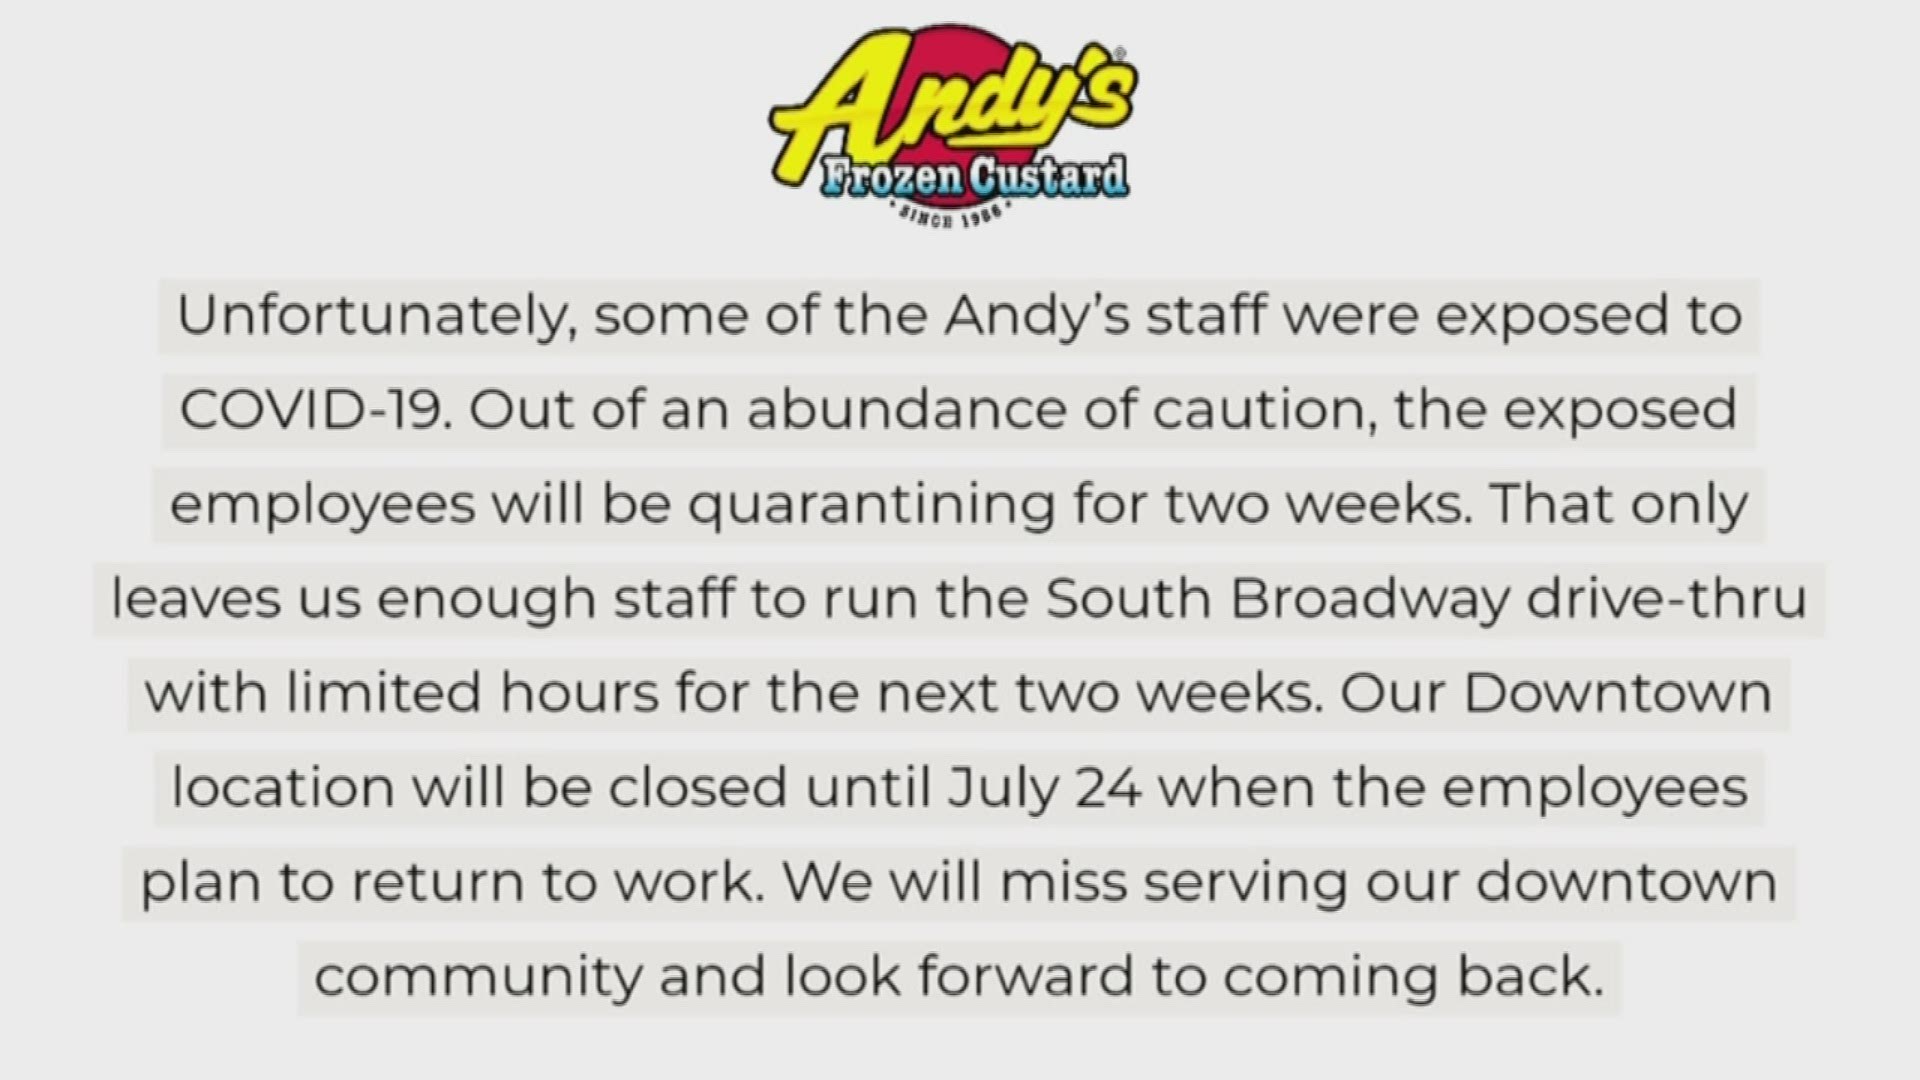 The Andy's location on South Broadway will reopen the drive-thru only on Wednesday, with limited hours for the next two weeks.